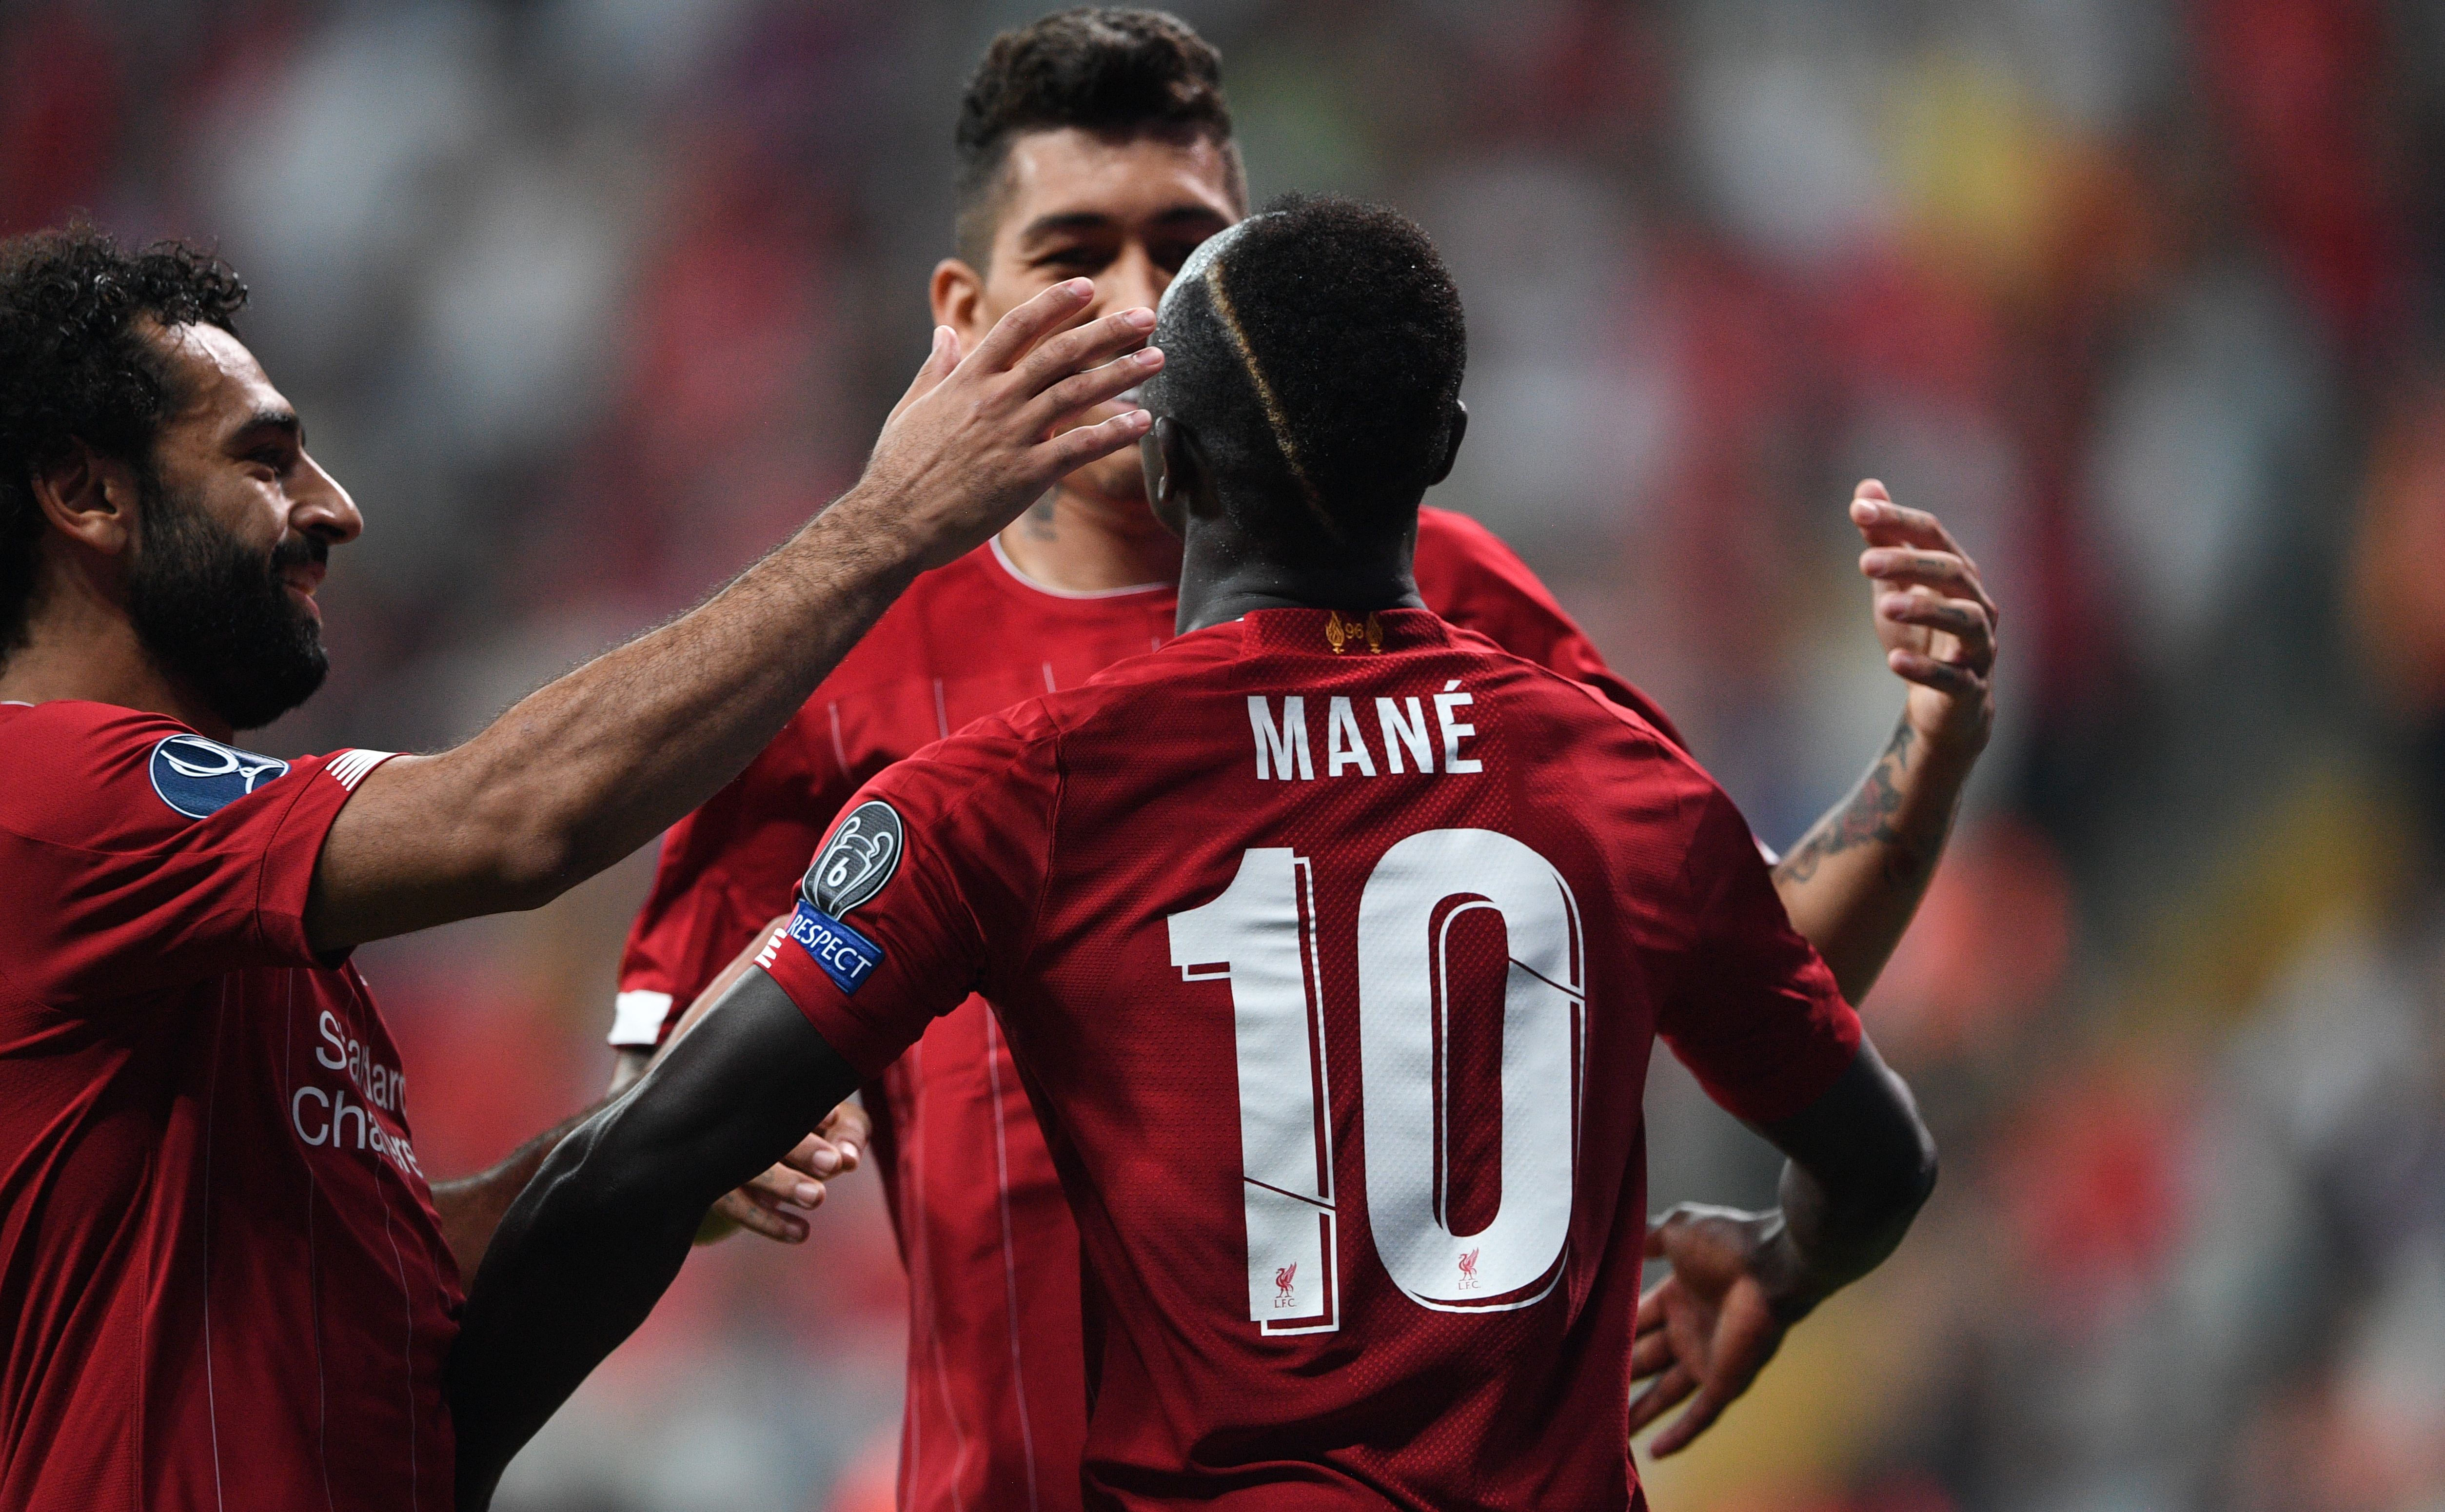 Liverpool's Senegalese striker Sadio Mane (R) celebrates with teammates Liverpool's Egyptian midfielder Mohamed Salah (L) and Liverpool's Brazilian midfielder Roberto Firmino after scoring a goal during the UEFA Super Cup 2019 football match between FC Liverpool and FC Chelsea at Besiktas Park Stadium in Istanbul on August 14, 2019. (Photo by Bulent Kilic / AFP)        (Photo credit should read BULENT KILIC/AFP/Getty Images)